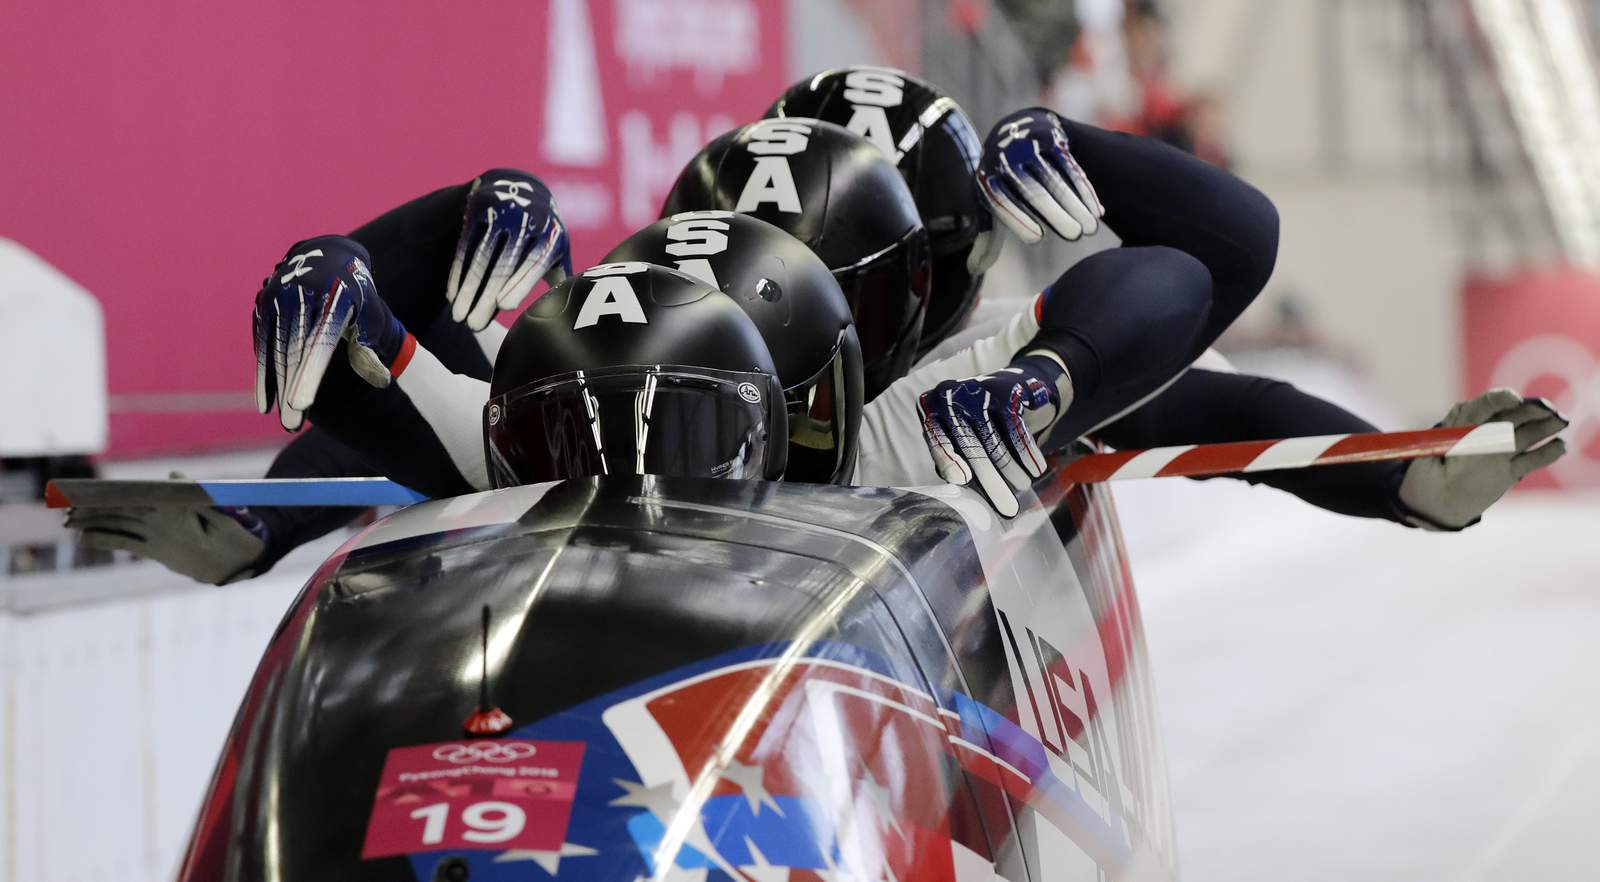 For some bobsled hopefuls, the Olympics may be a click away